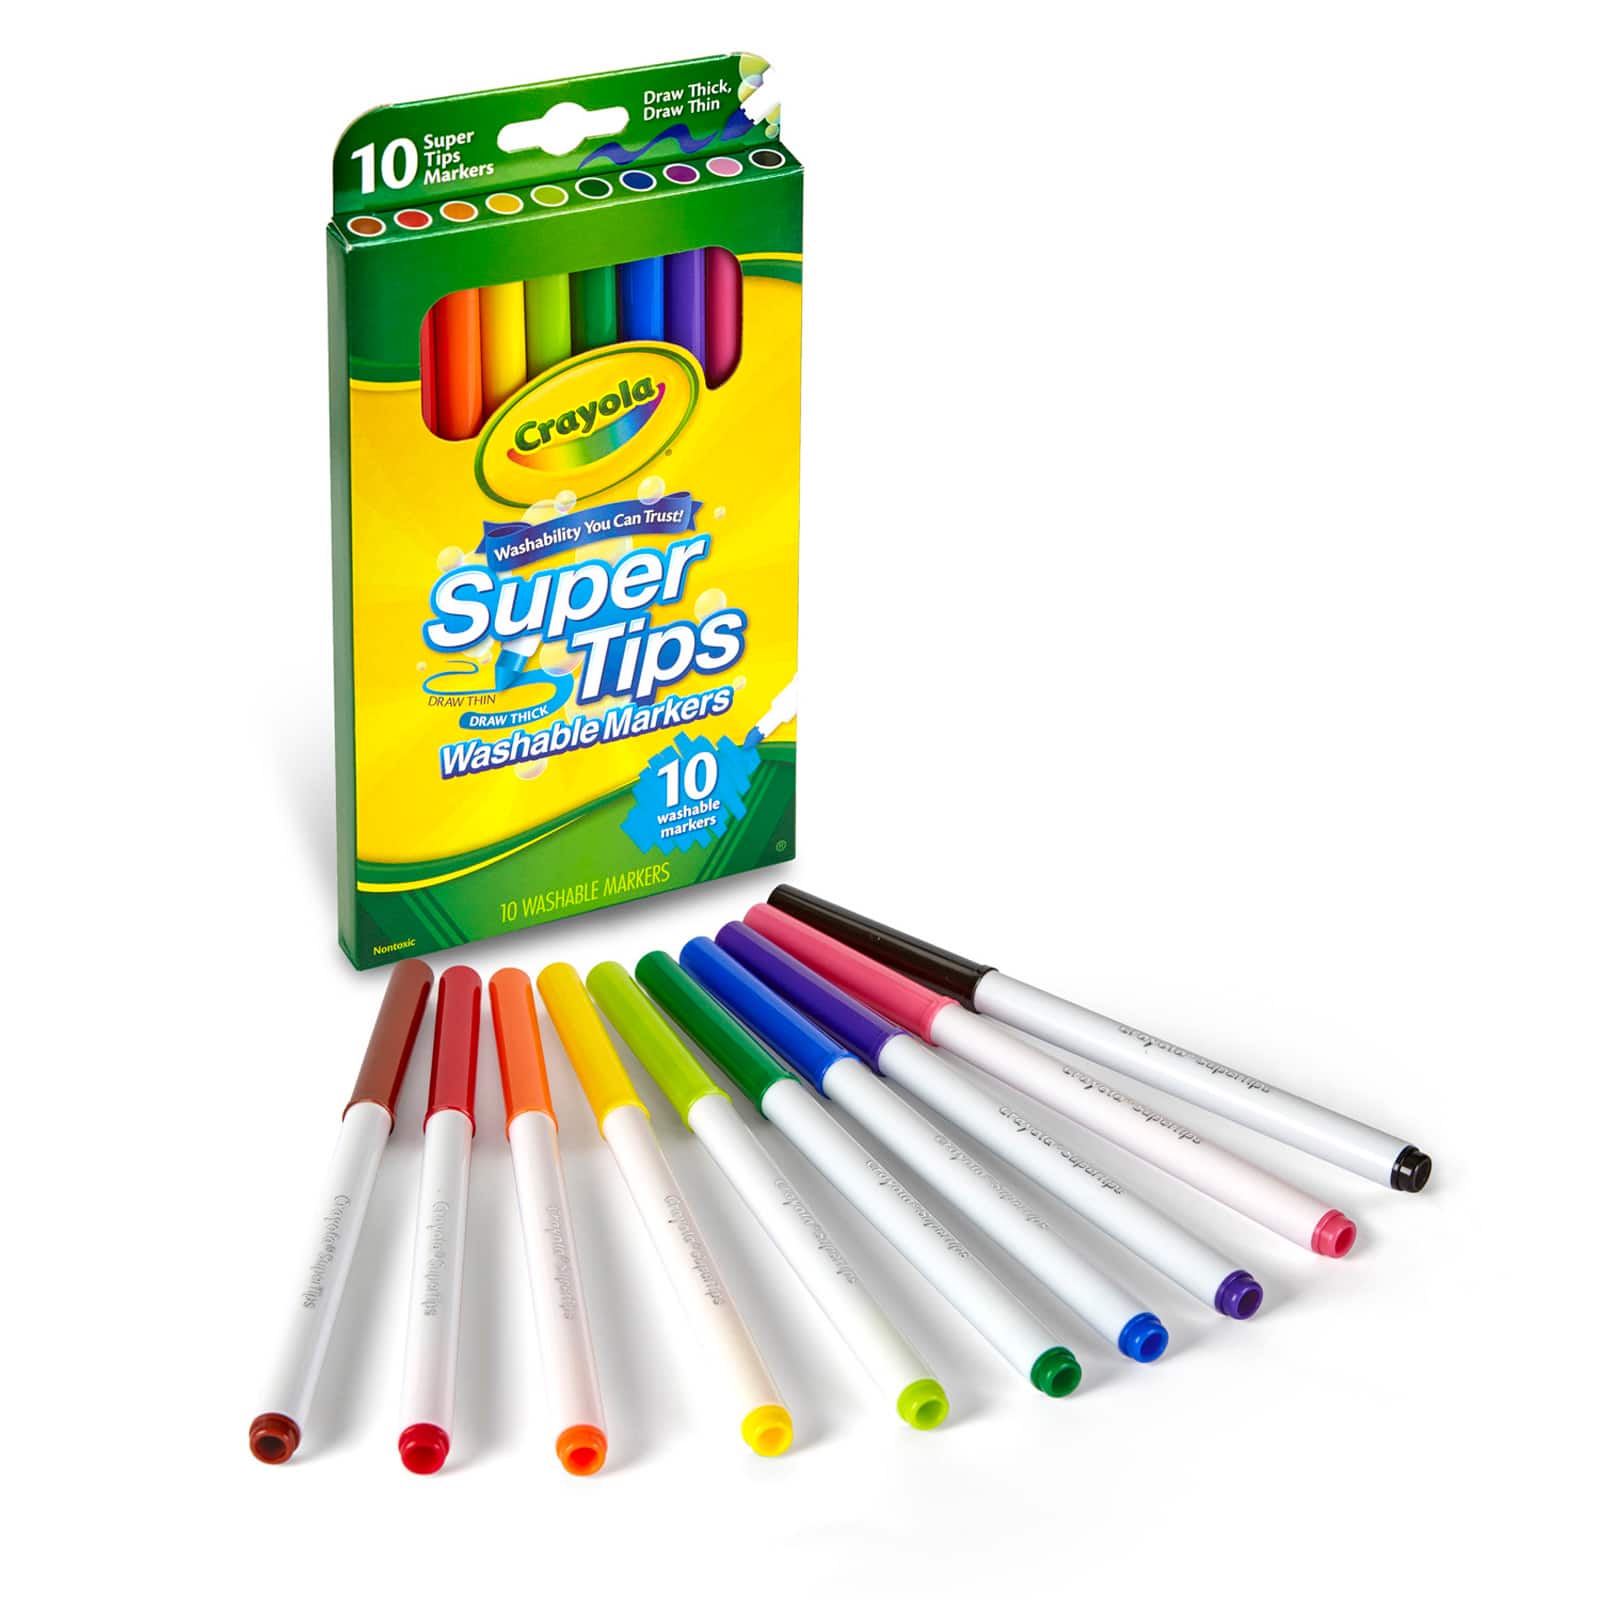 I bought a 12 pack of Crayola Supertips and got the pens below (above are  pens from a 50 pack for comparison), are all 12 packs like this? :  r/stationery